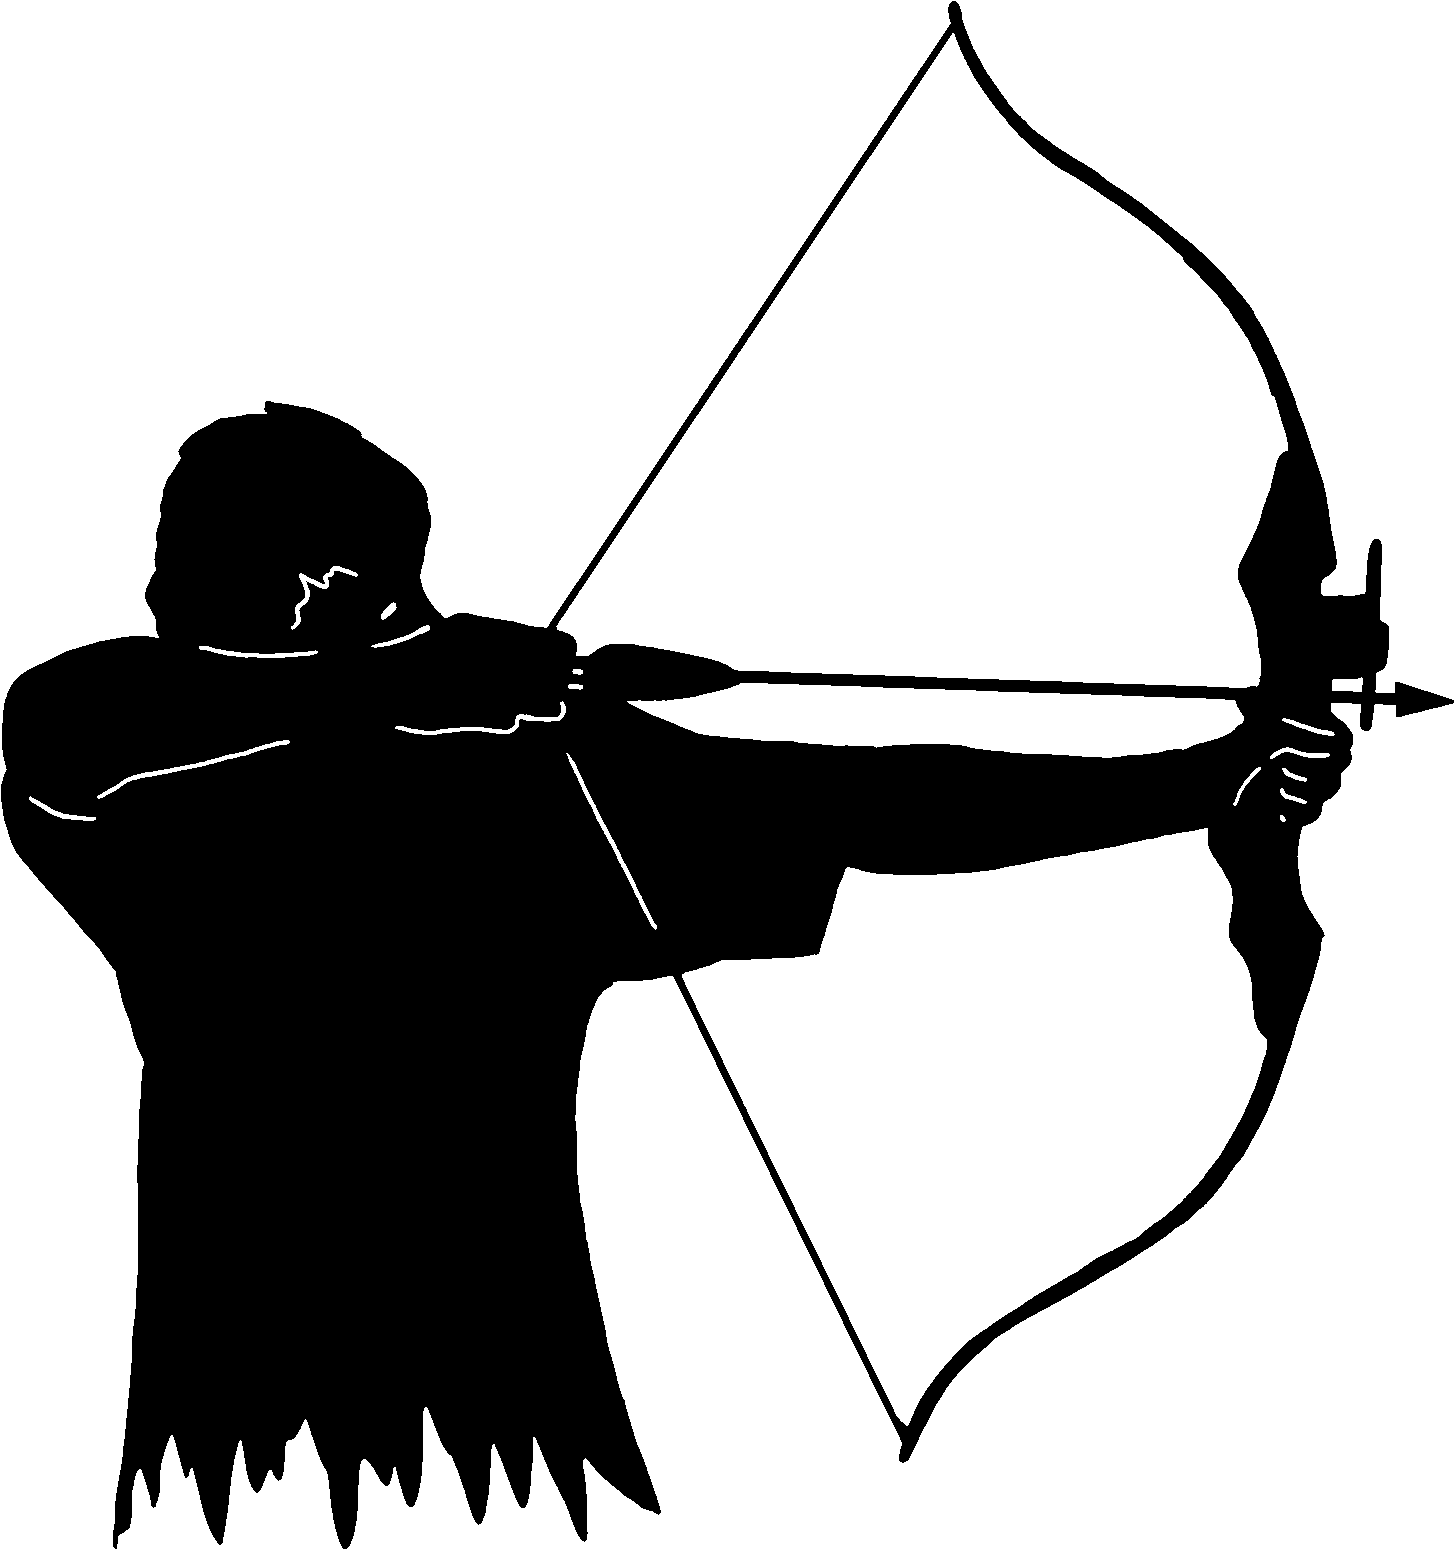 Archery Download On Library Transparent Image Clipart